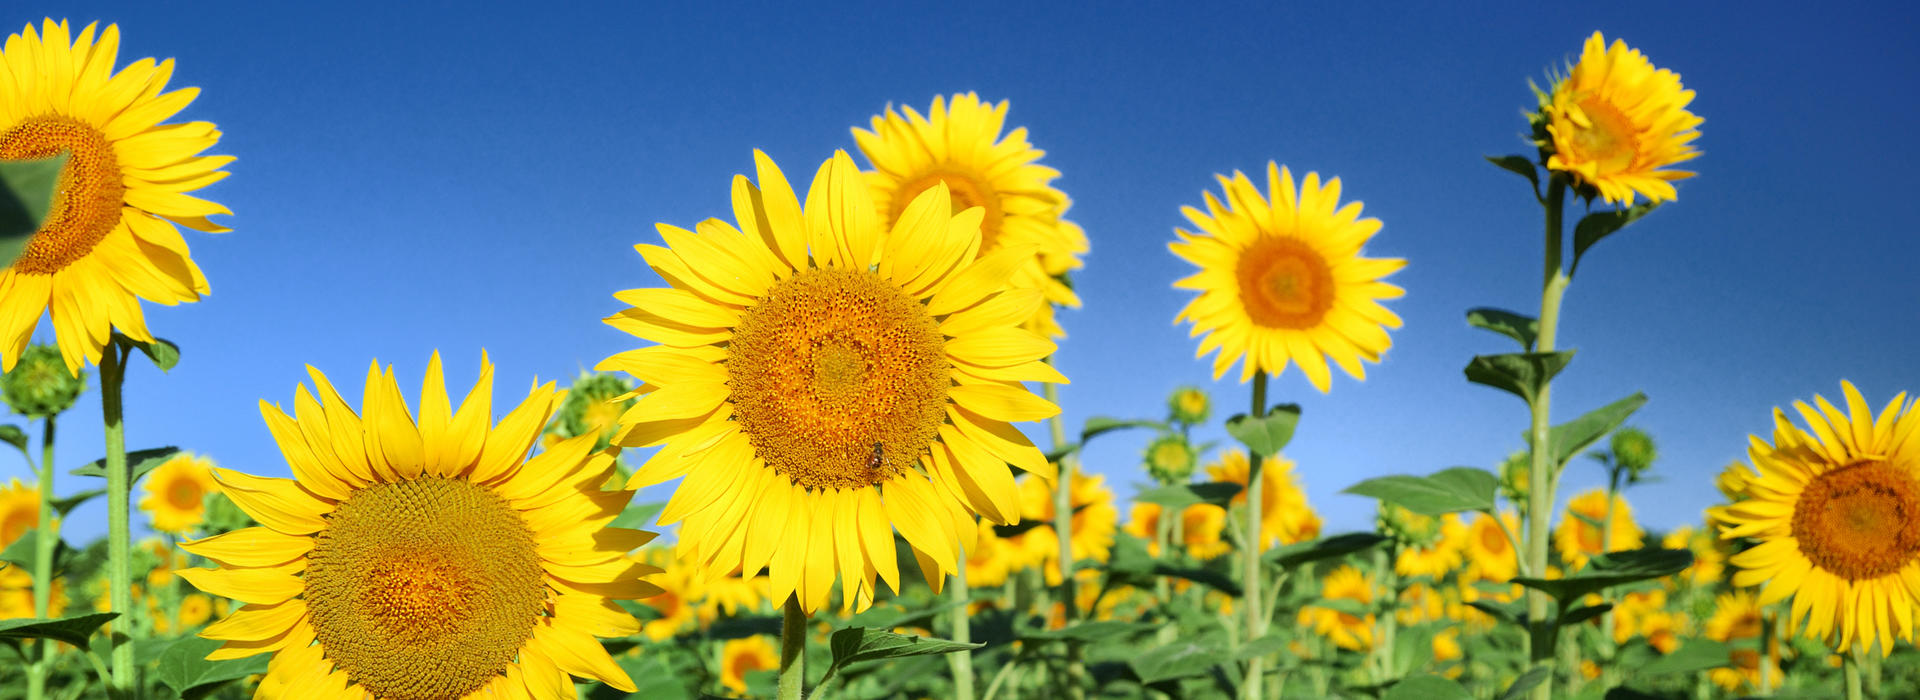 picture of sunflowers